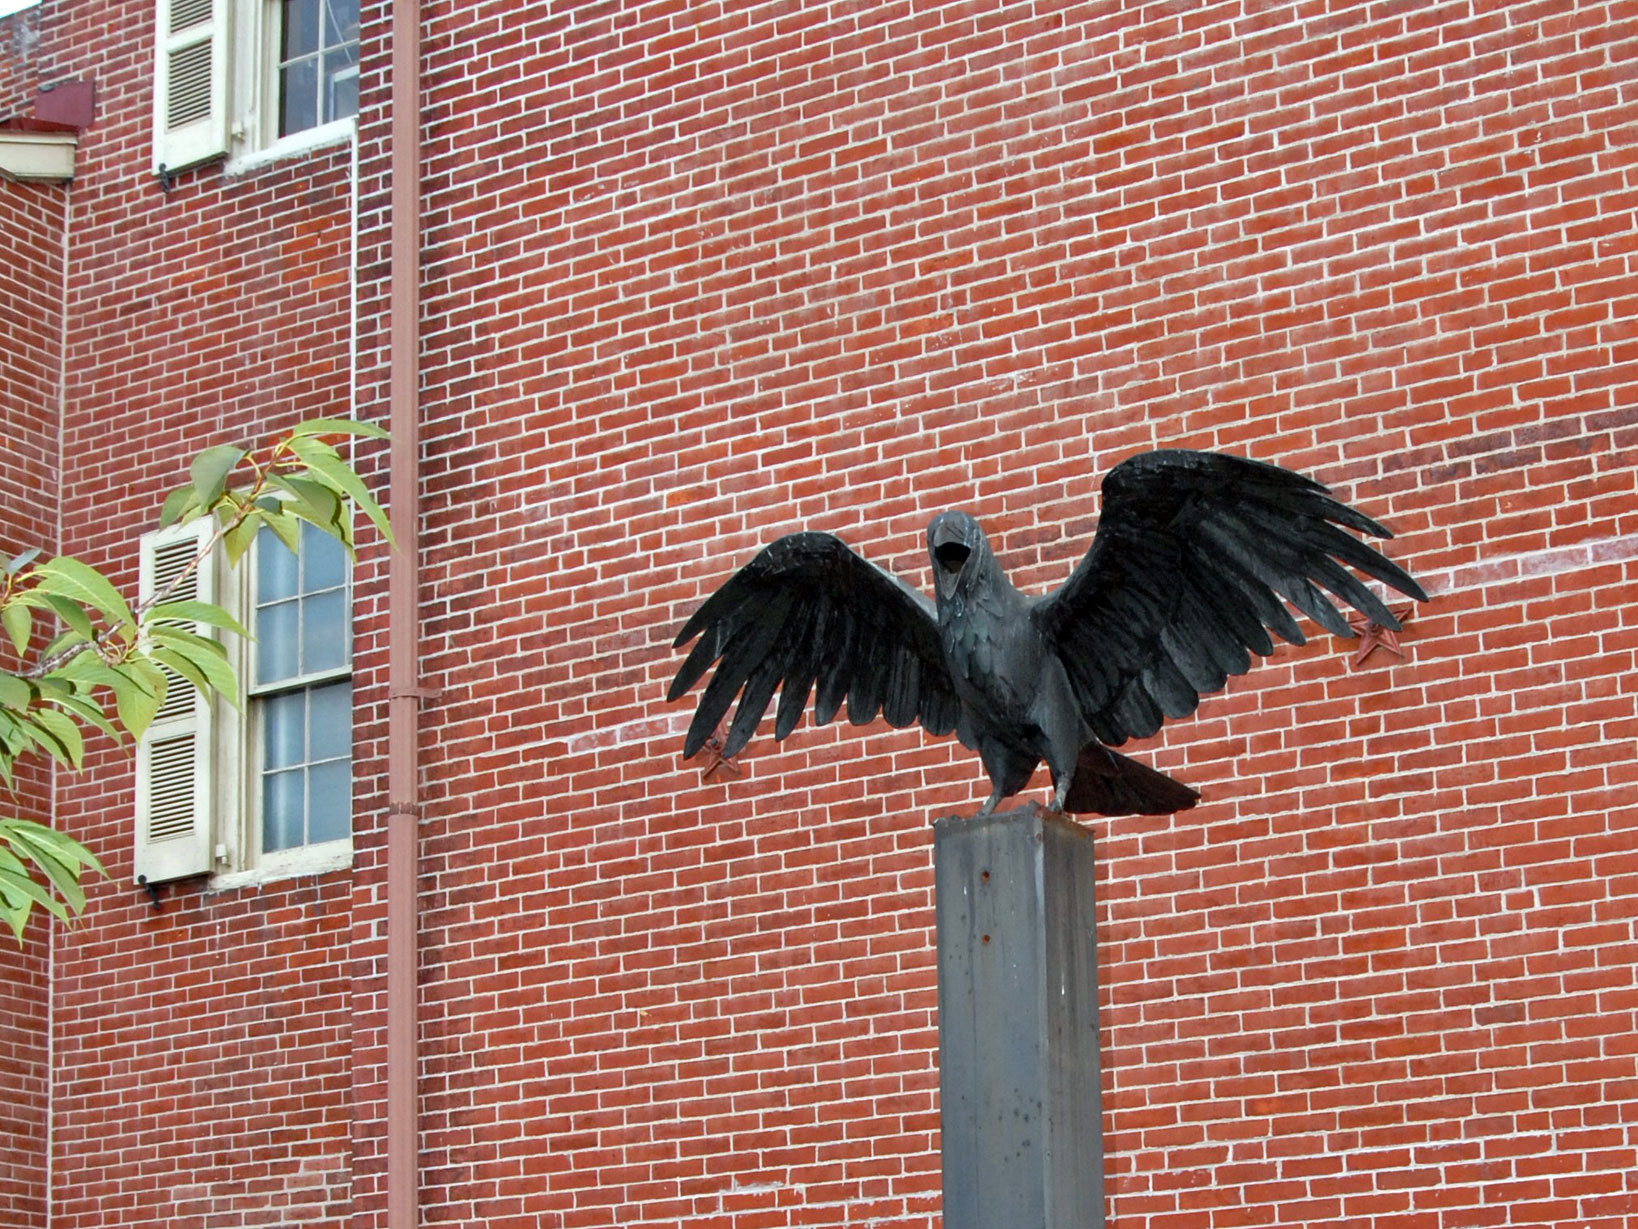 Color photo showing a large raven statue with wings outspread on a metal plinth.